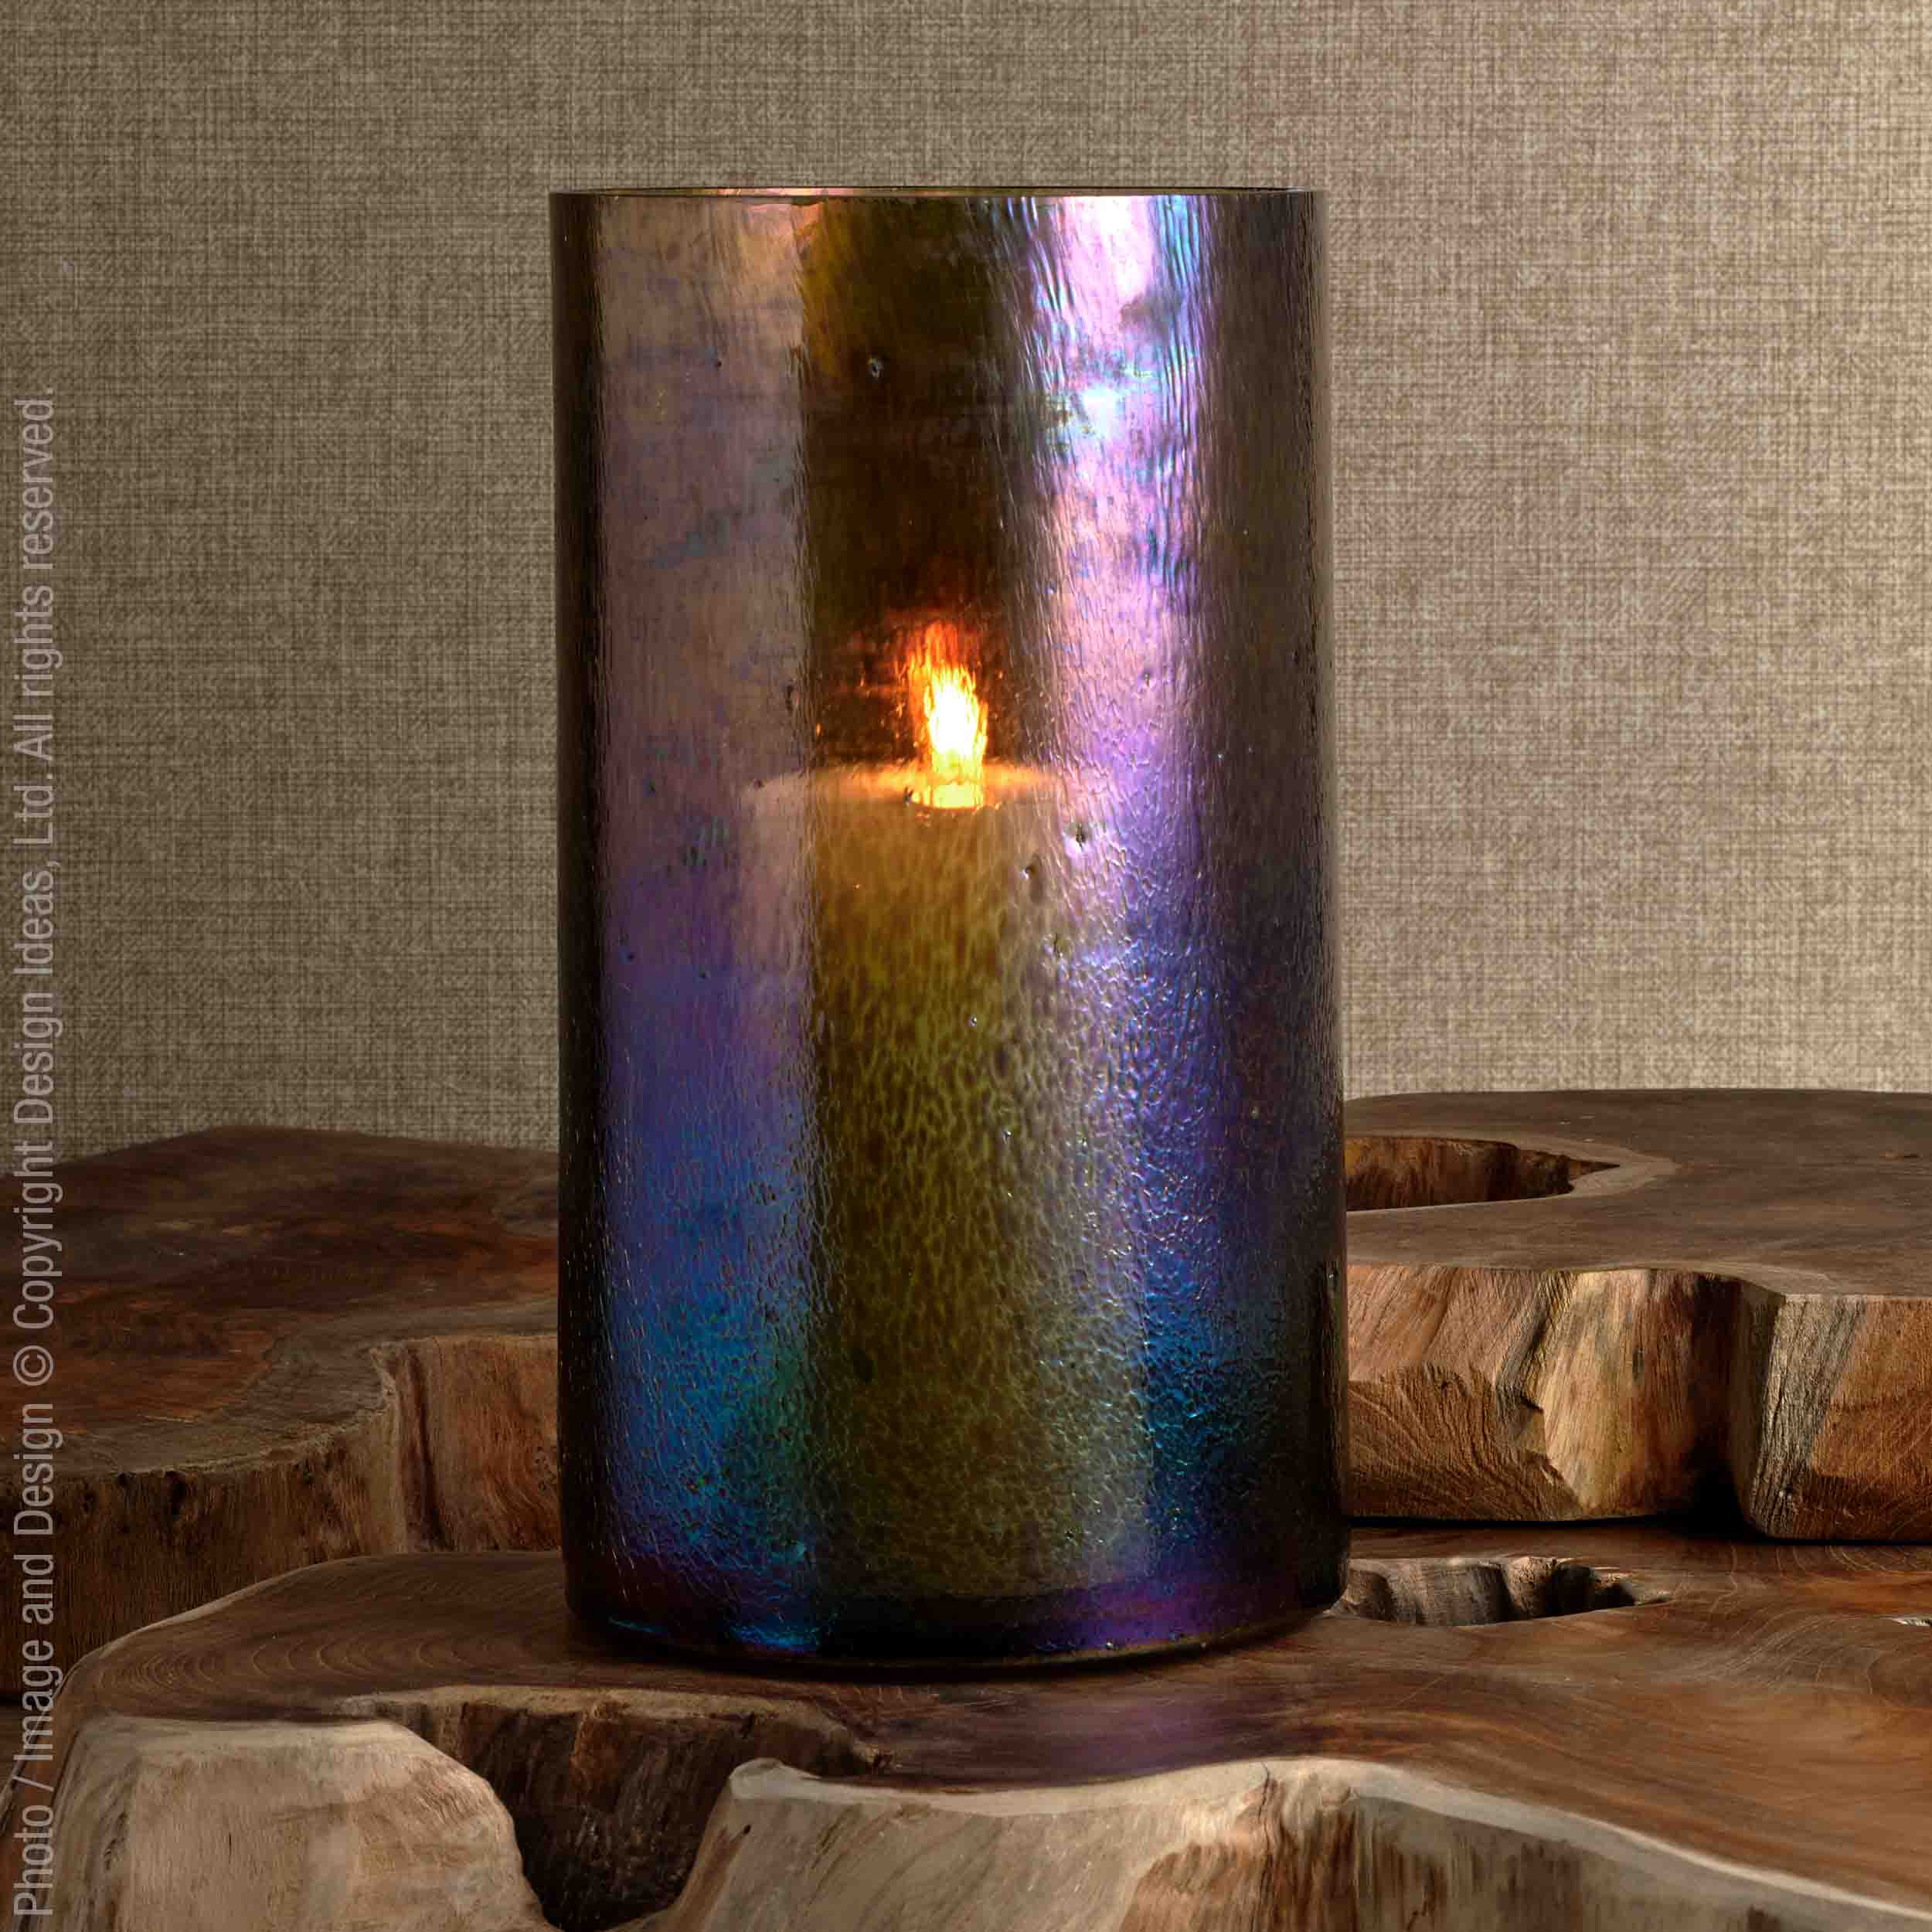 Hubbard™ hurricane (10in) - Golden | Image 1 | Premium Candleholder from the Hubbard collection | made with 100% Glass for long lasting use | texxture